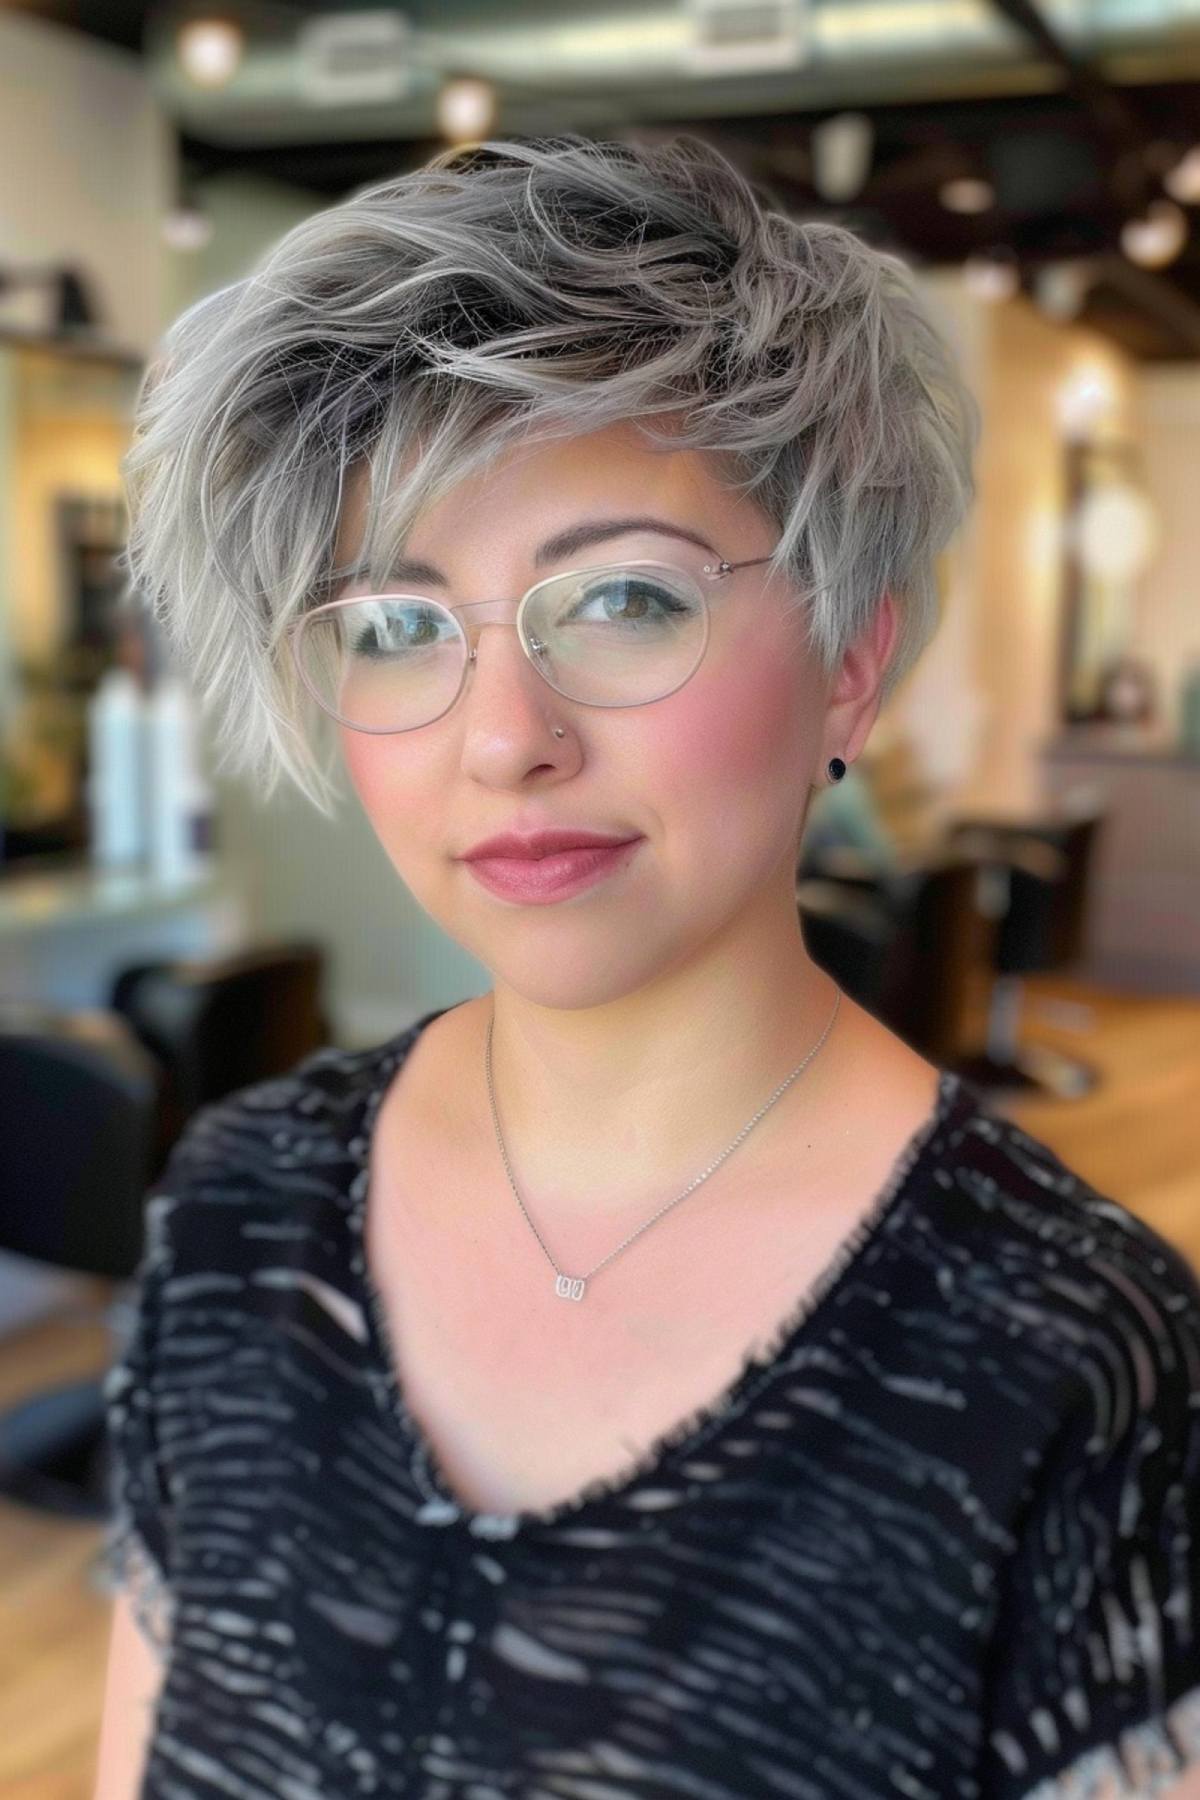 Stylish woman with textured fluffy wave pixie cut in silver and sable tones